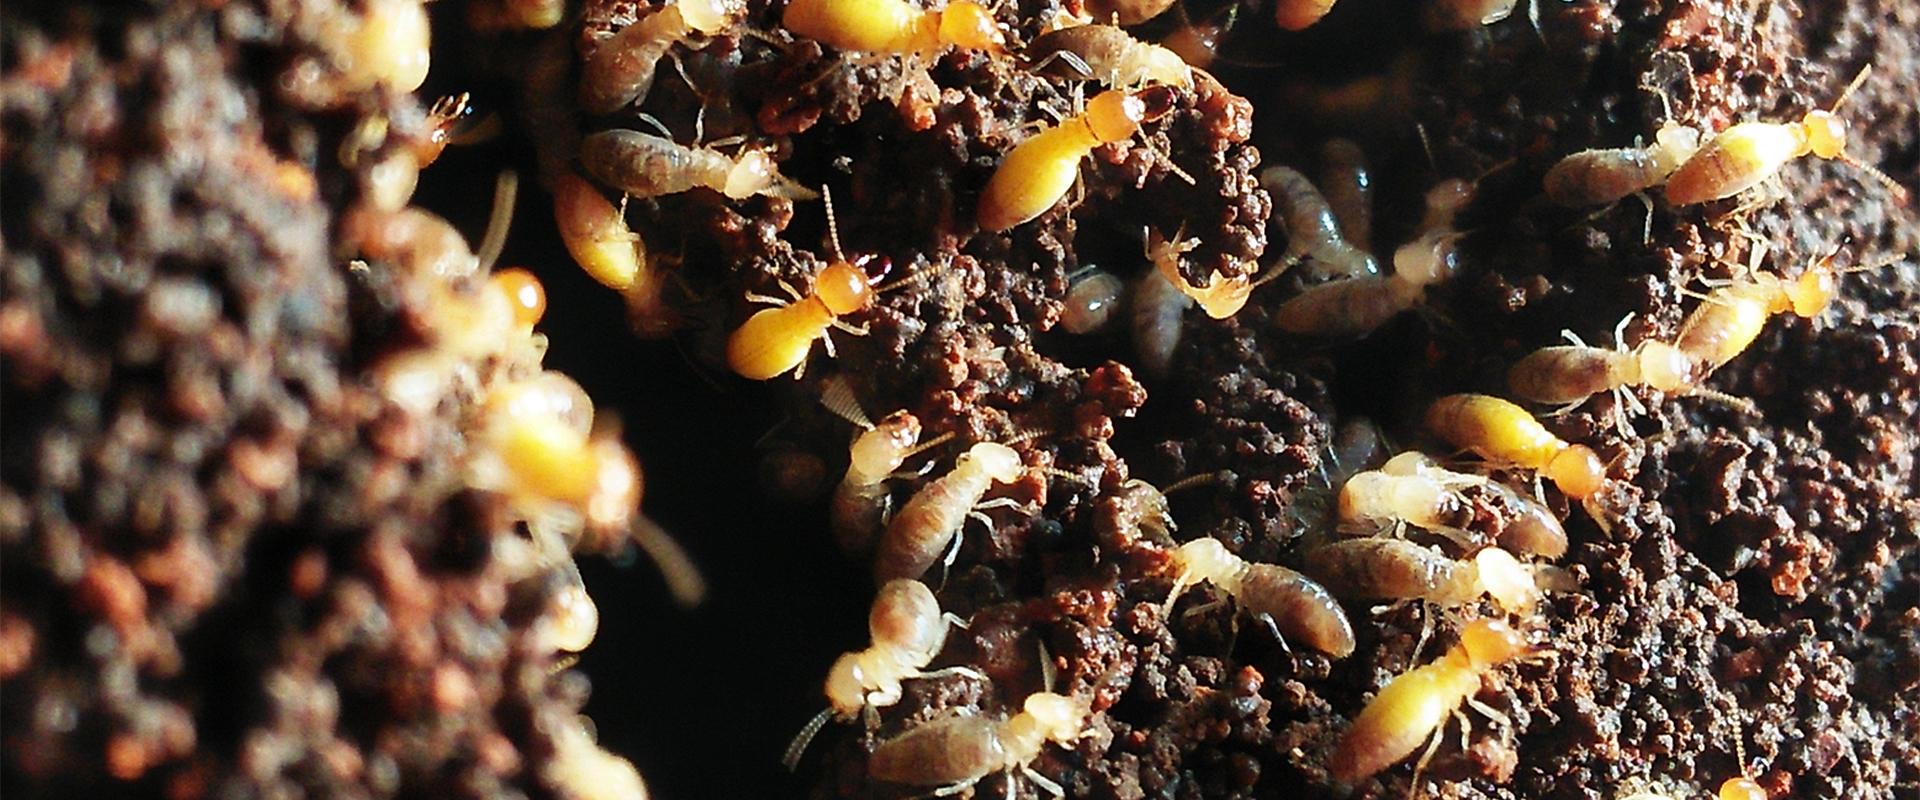 termites in a mound